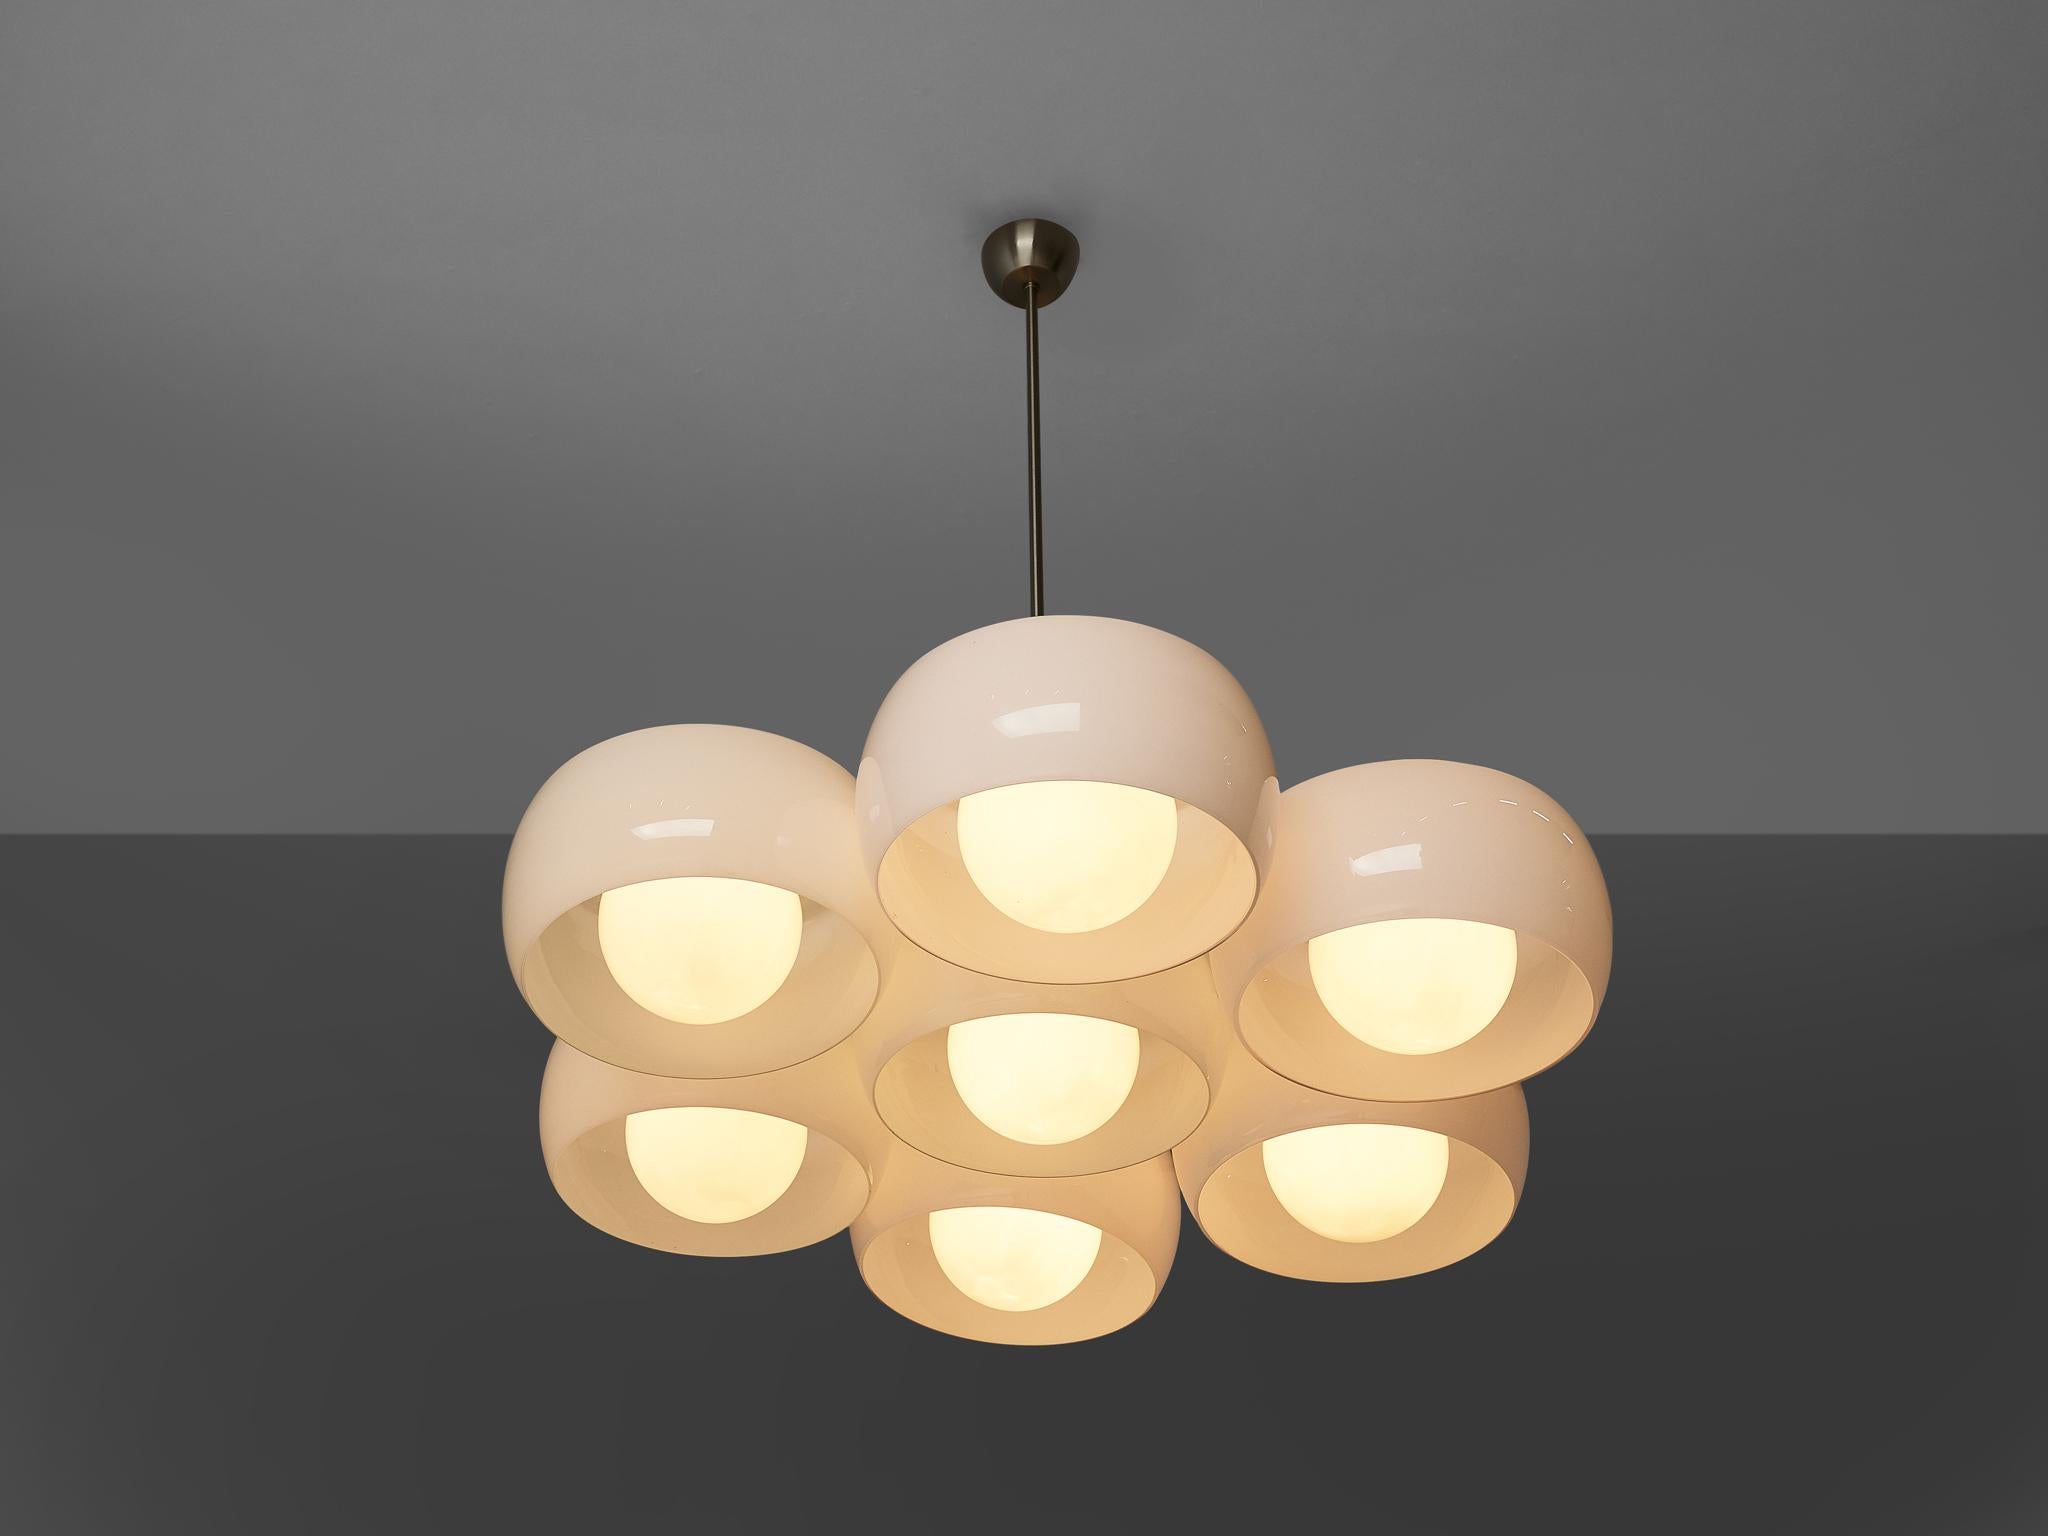 Mid-20th Century Listing for KNS: Vico Magistretti for Artemide Chandelier 'Eptaclinio'